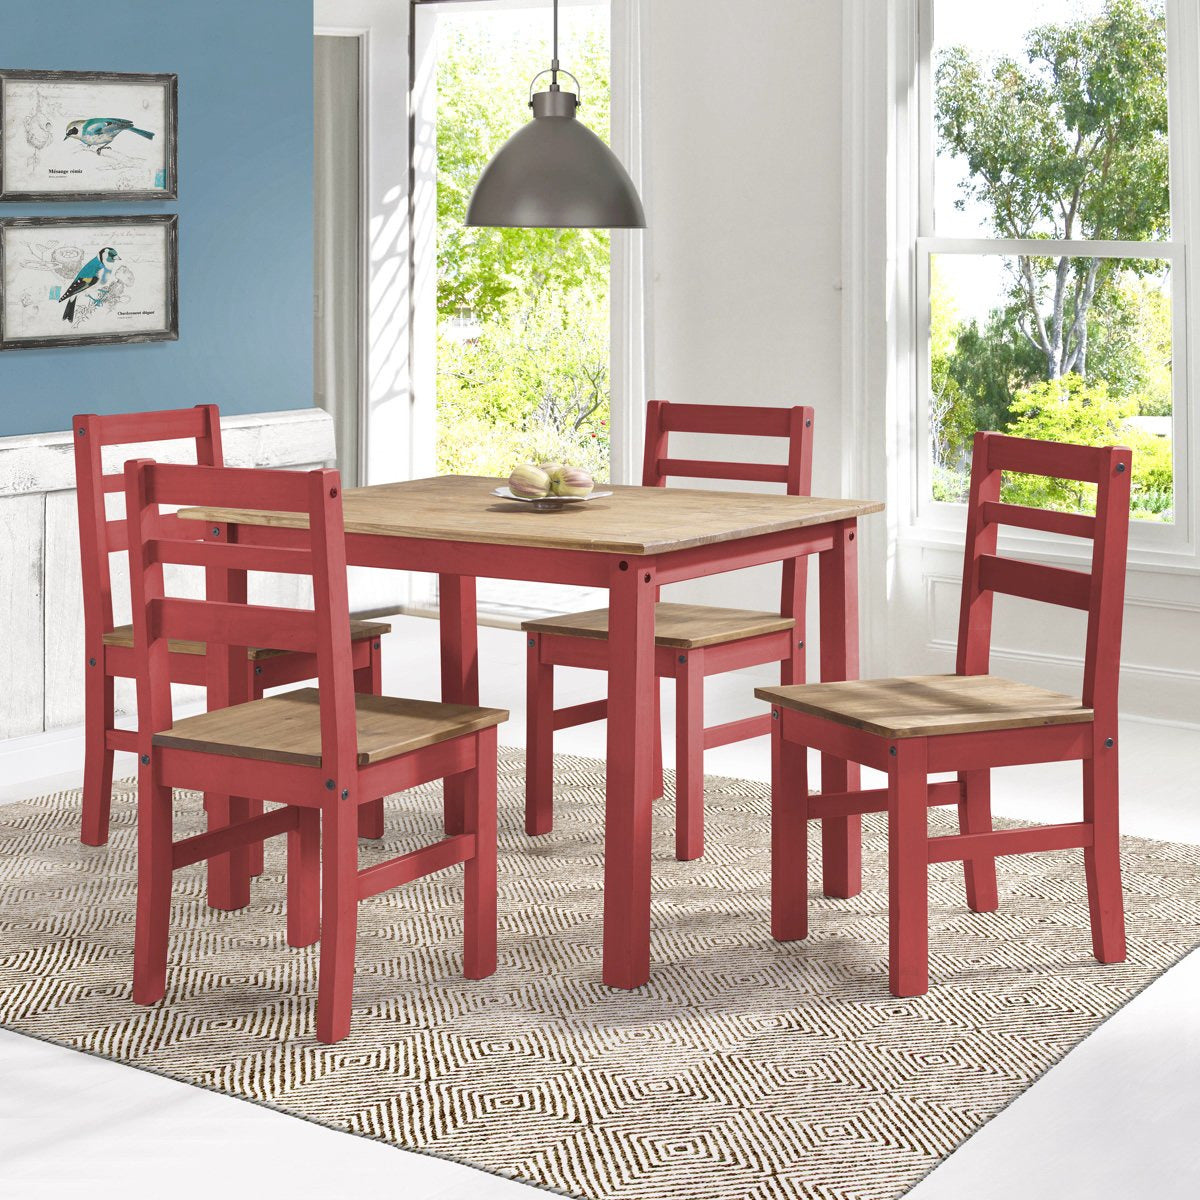 Manhattan Comfort Maiden 5-Piece Solid Wood Dining Set with 1 Table and 4 Chairs in Red Wash-Minimal & Modern